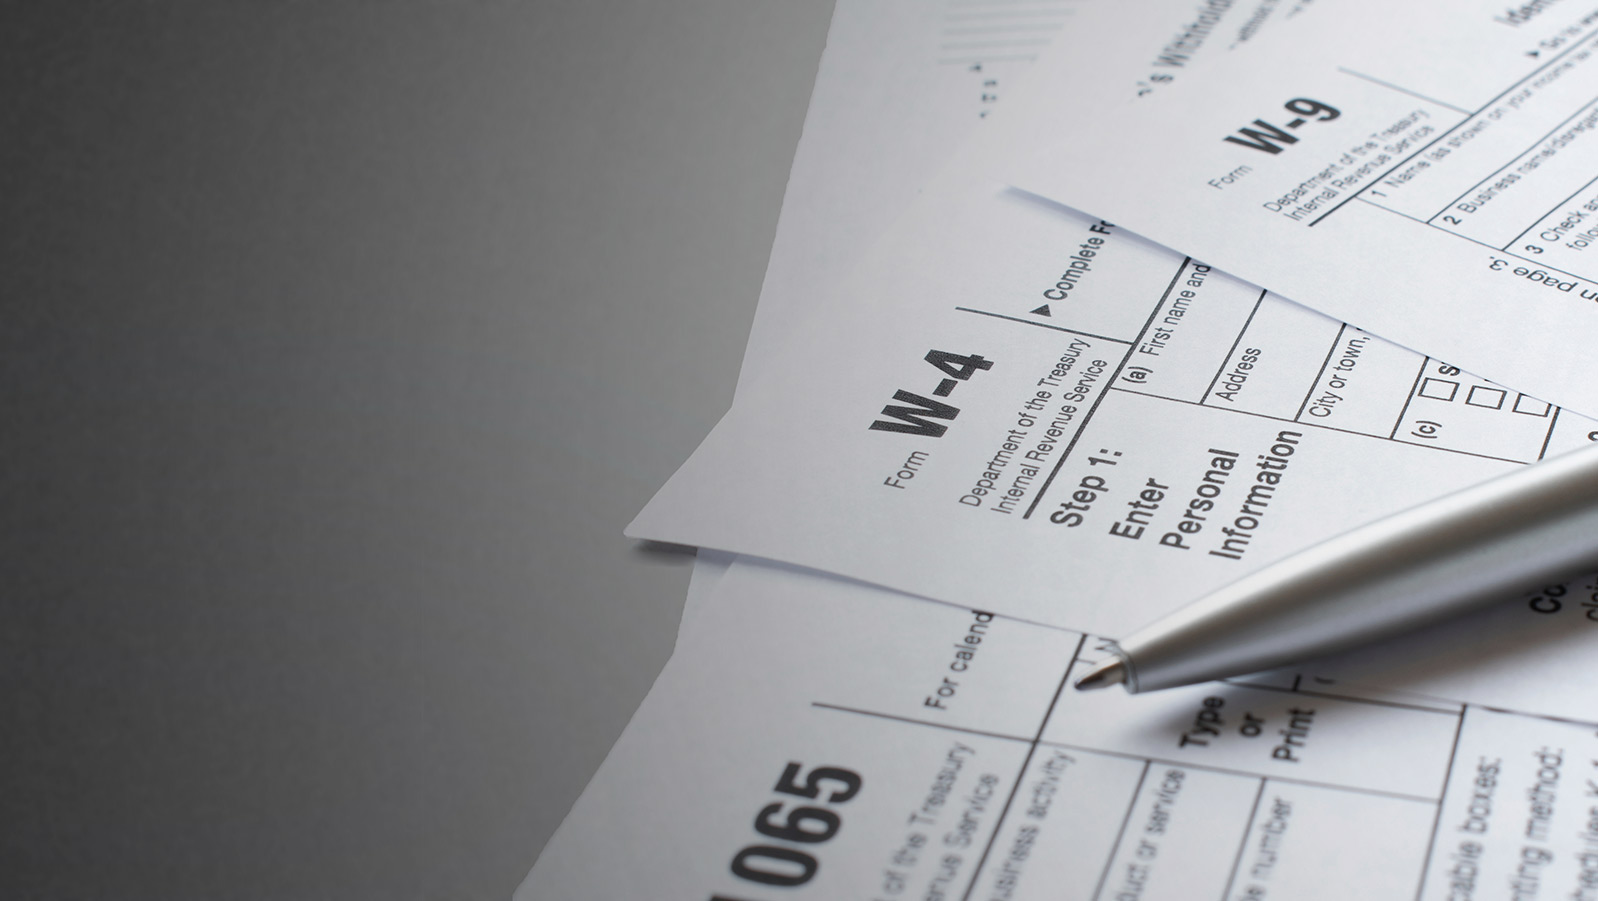 IRS tax forms on a desk